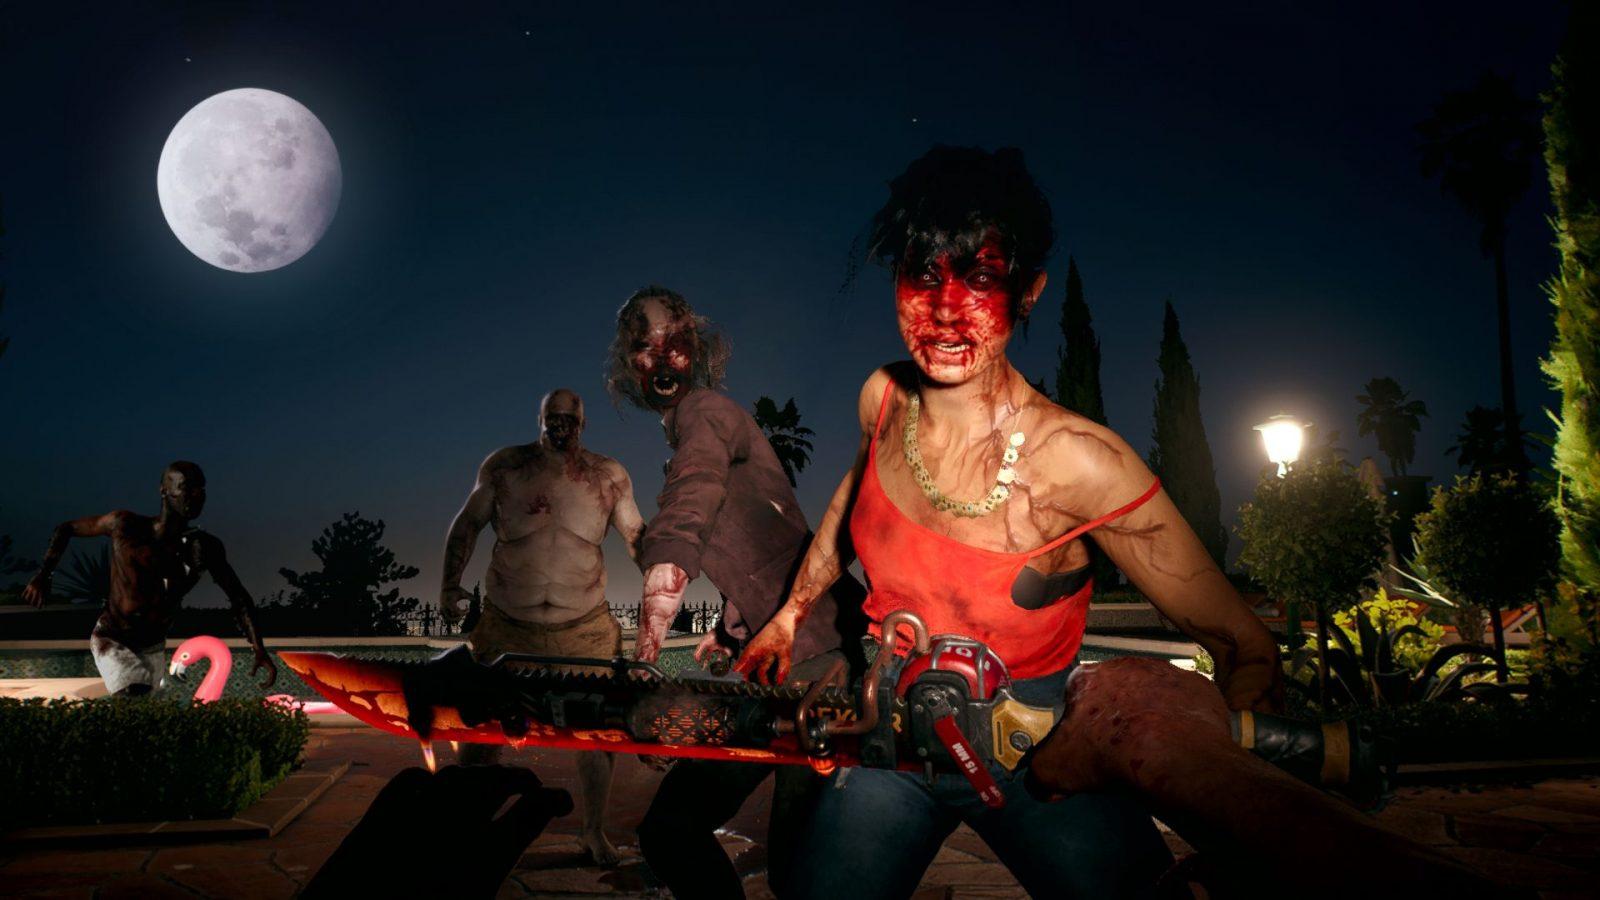 dead island 2 protagonist facing zombies at night